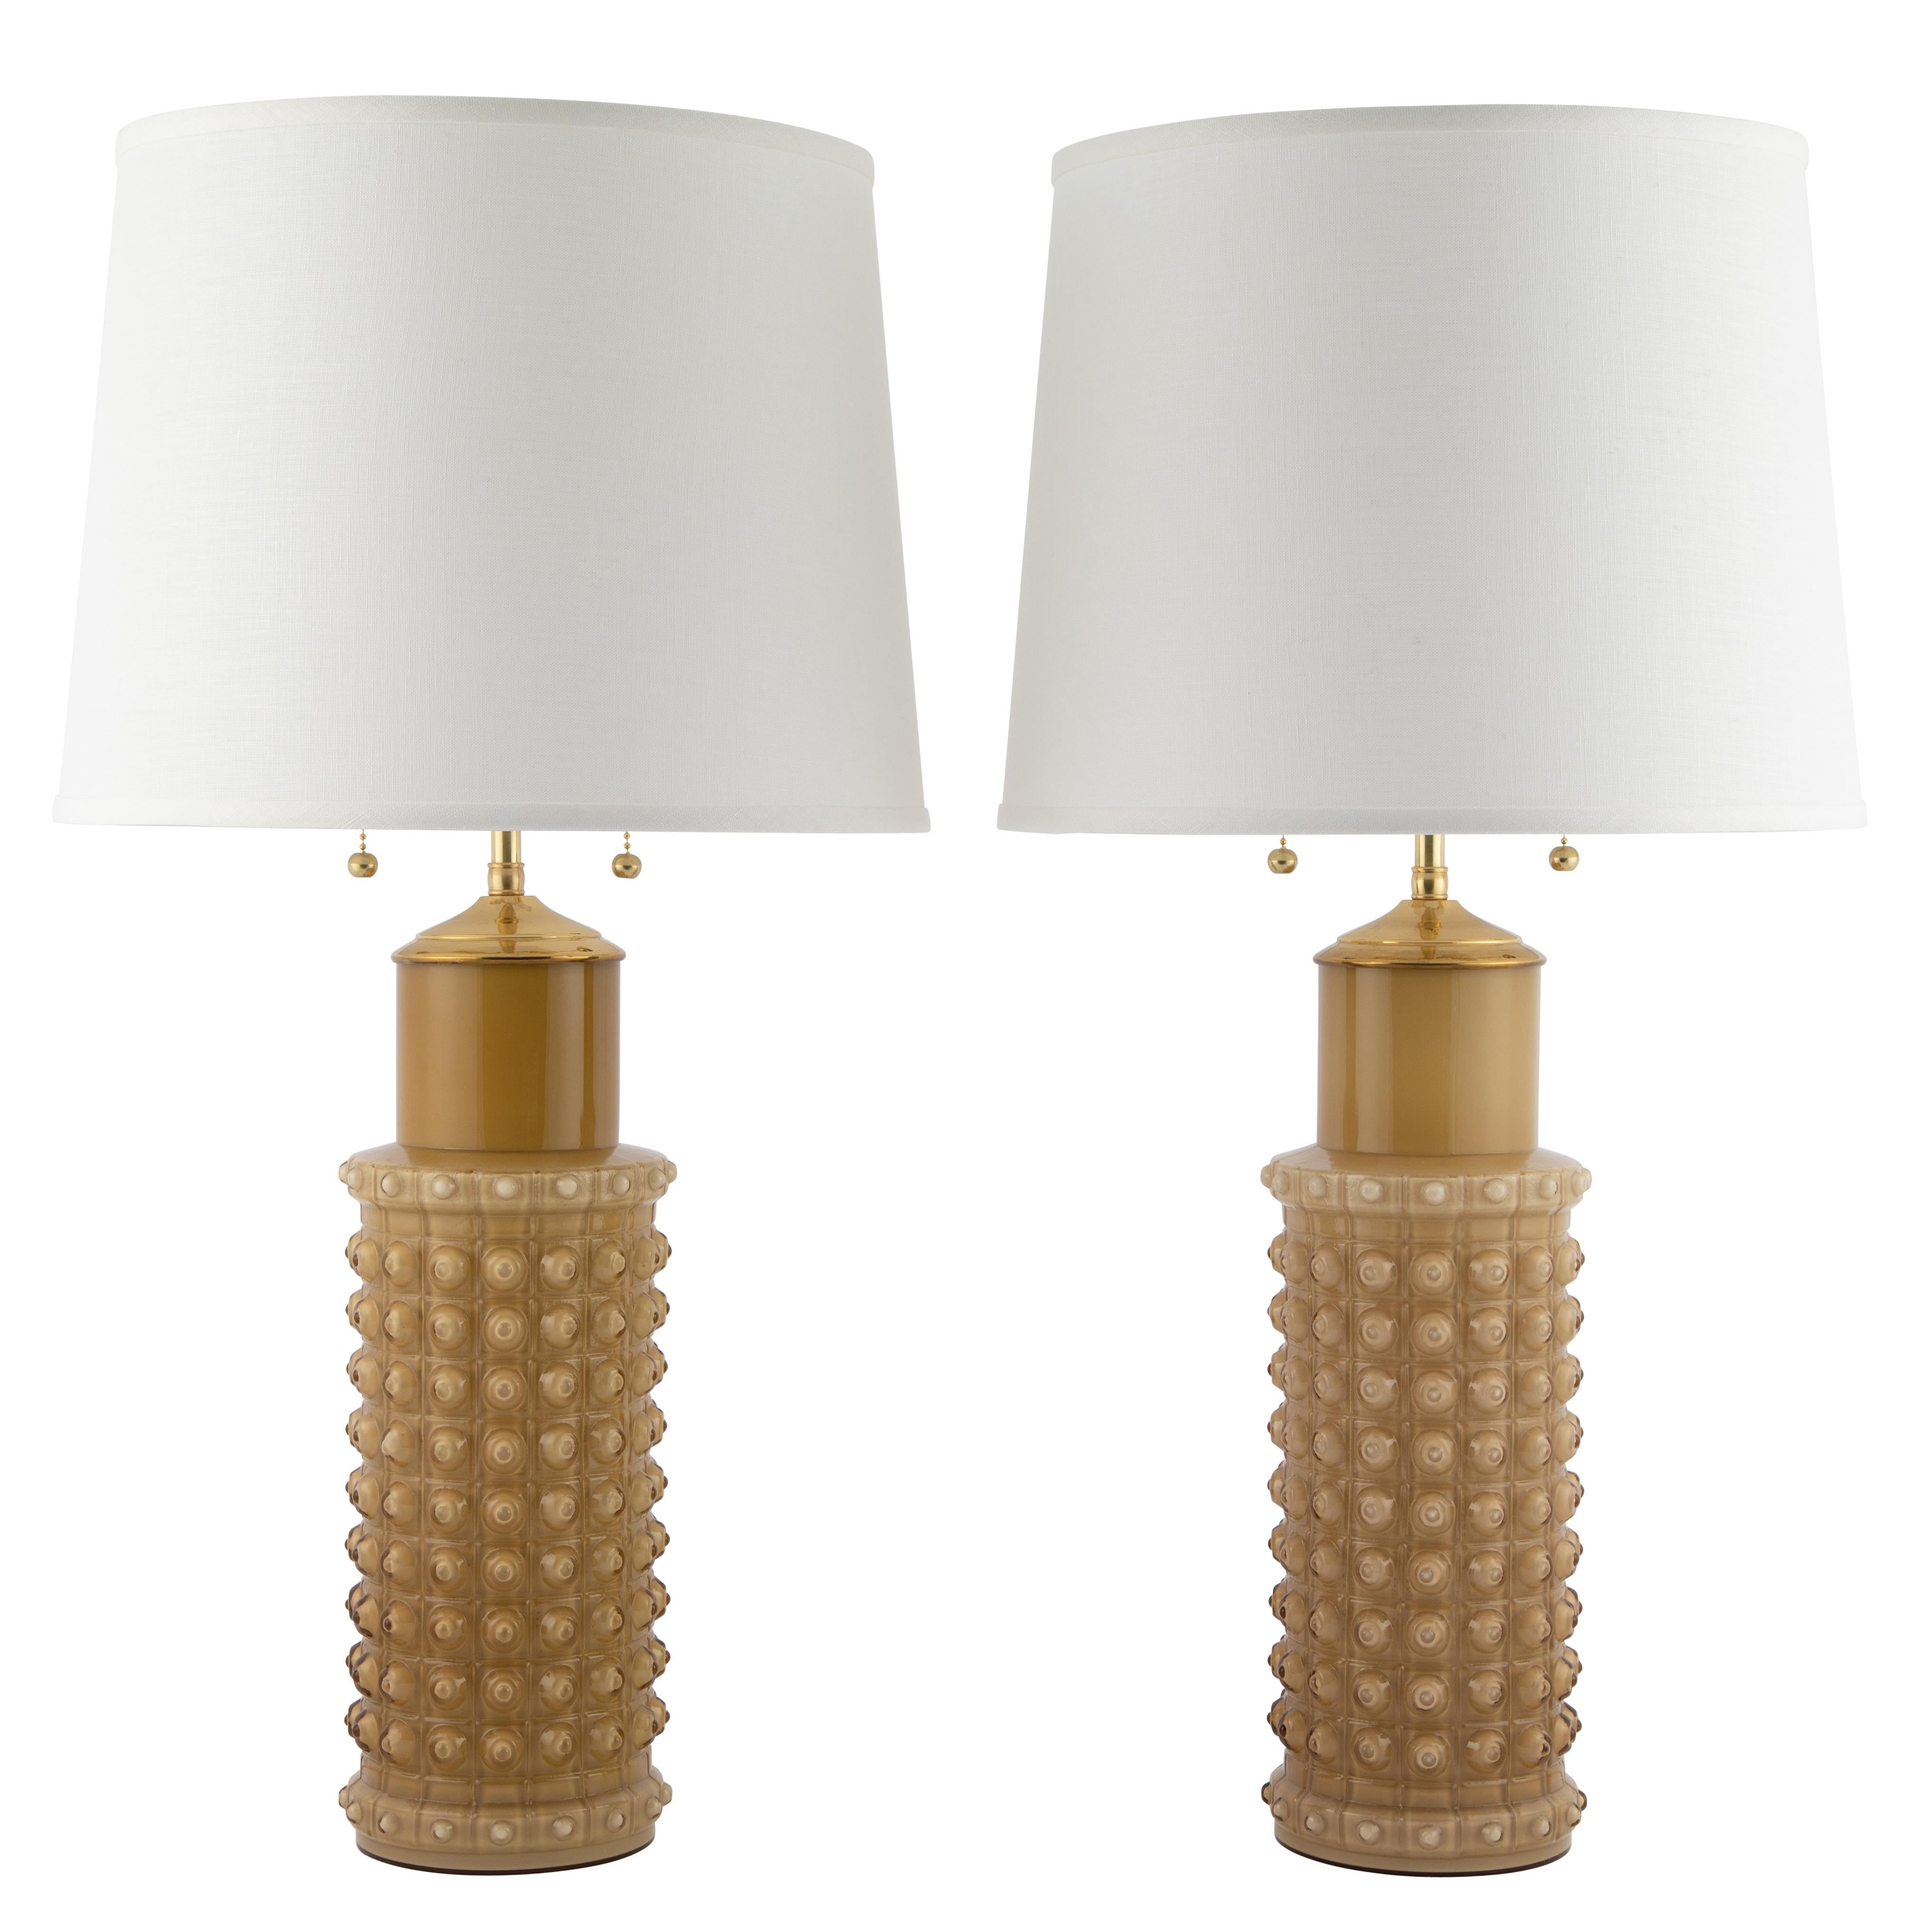 Helena Tynell for Luxus Butterscotch Glass Table Lamps, circa 1960s im Angebot